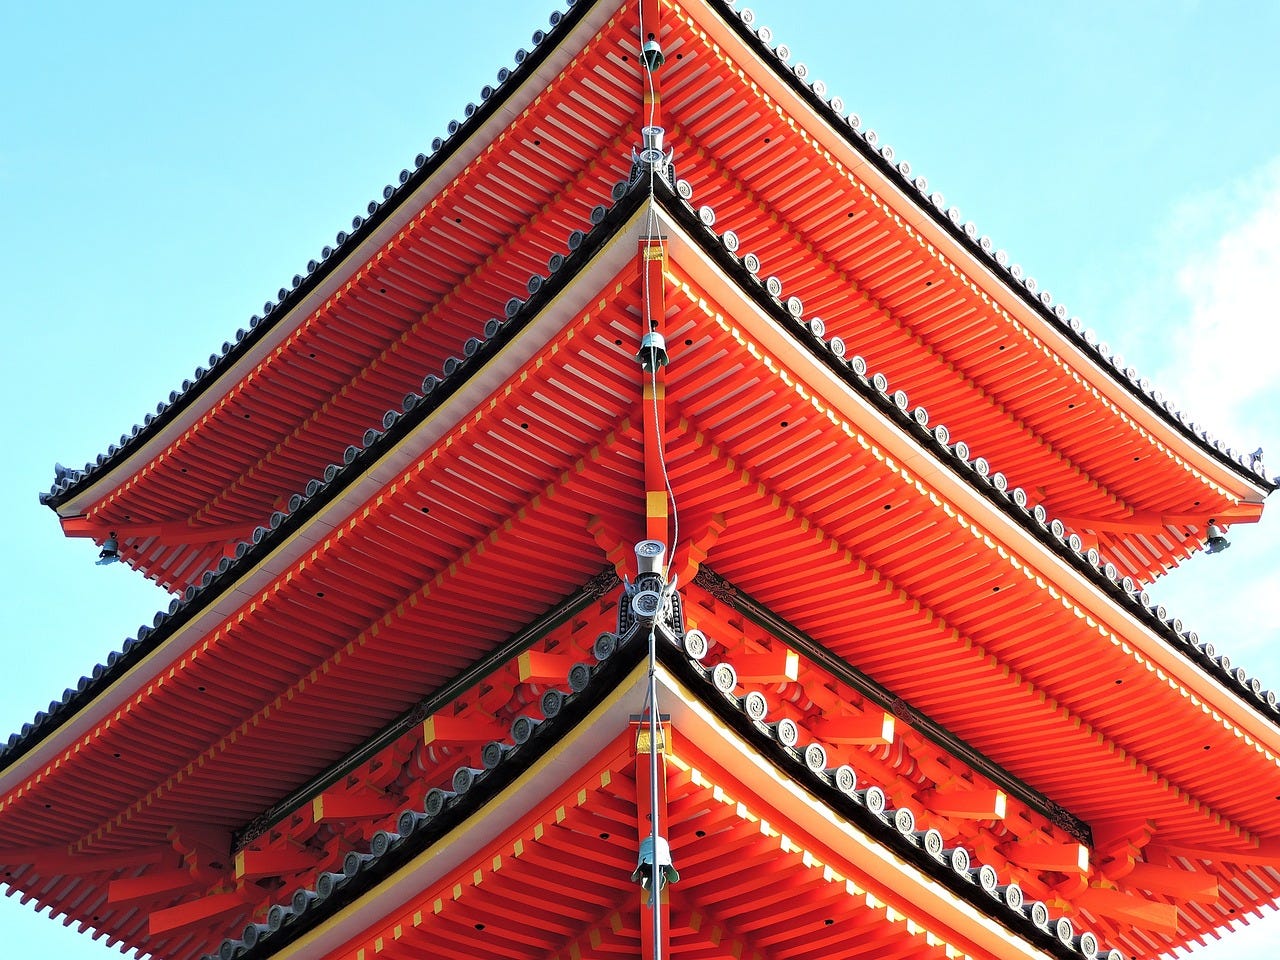 Looking up toward the roof of a pagoda.